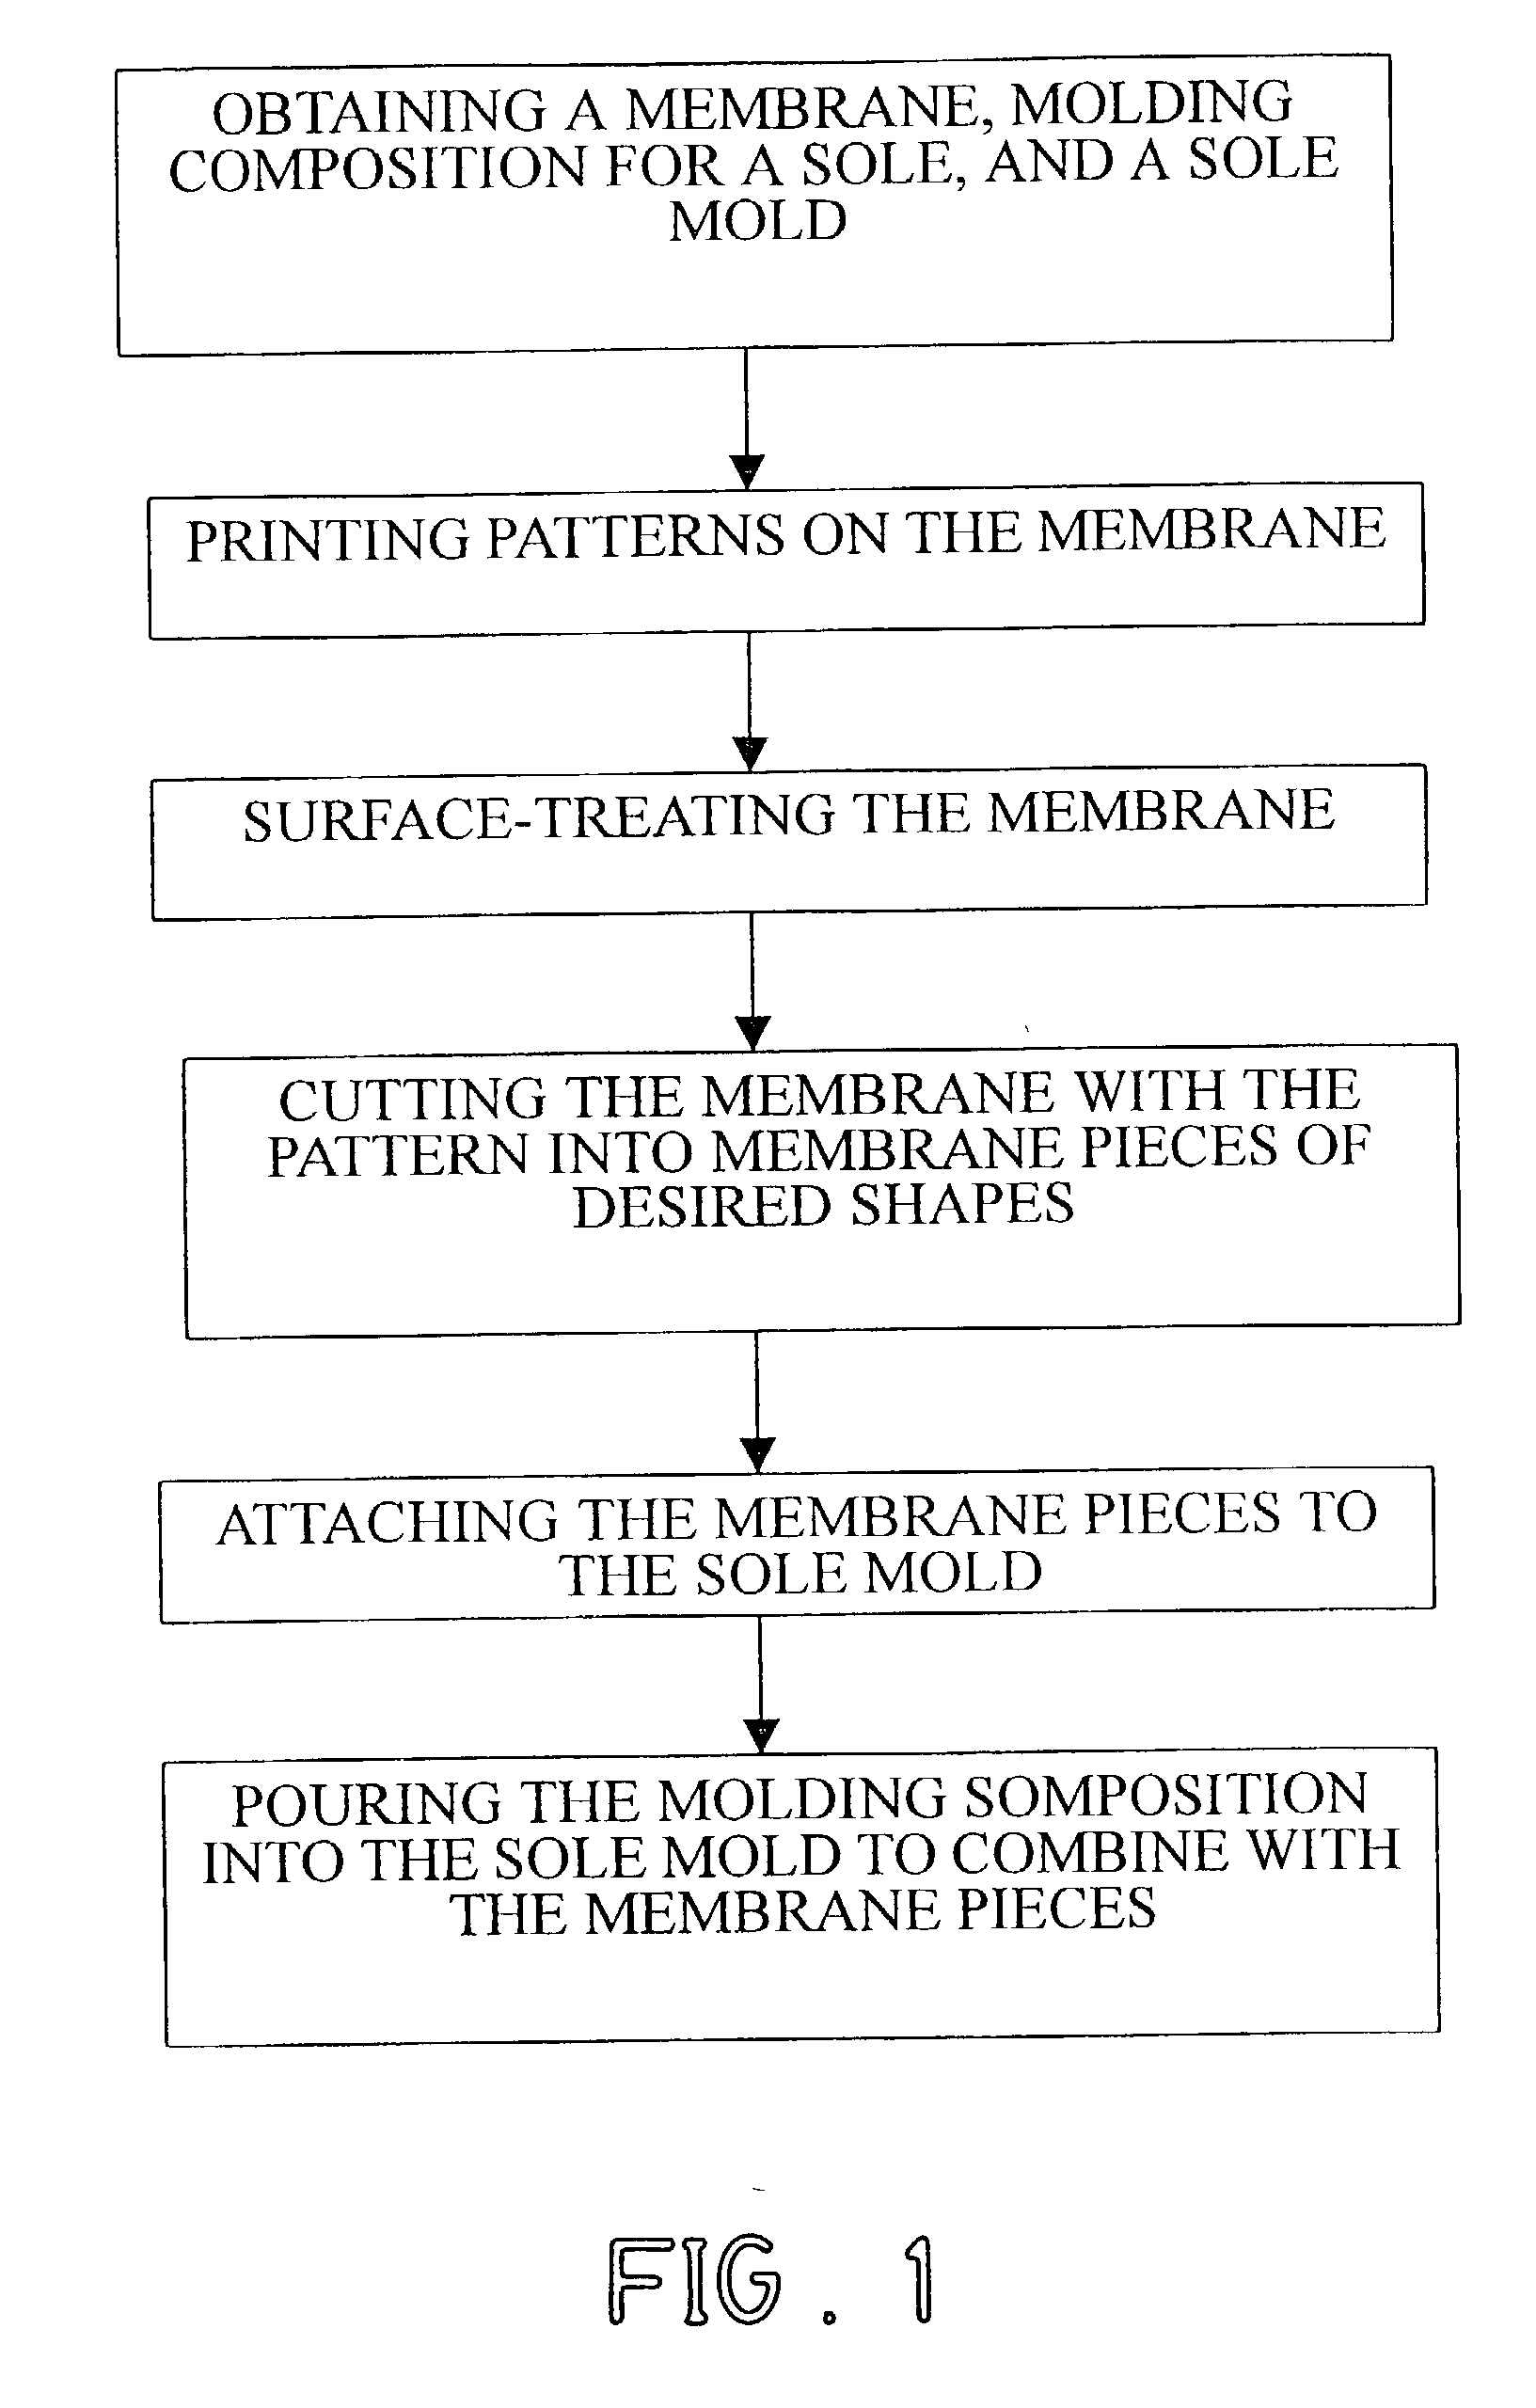 Method for producing a colorful sole